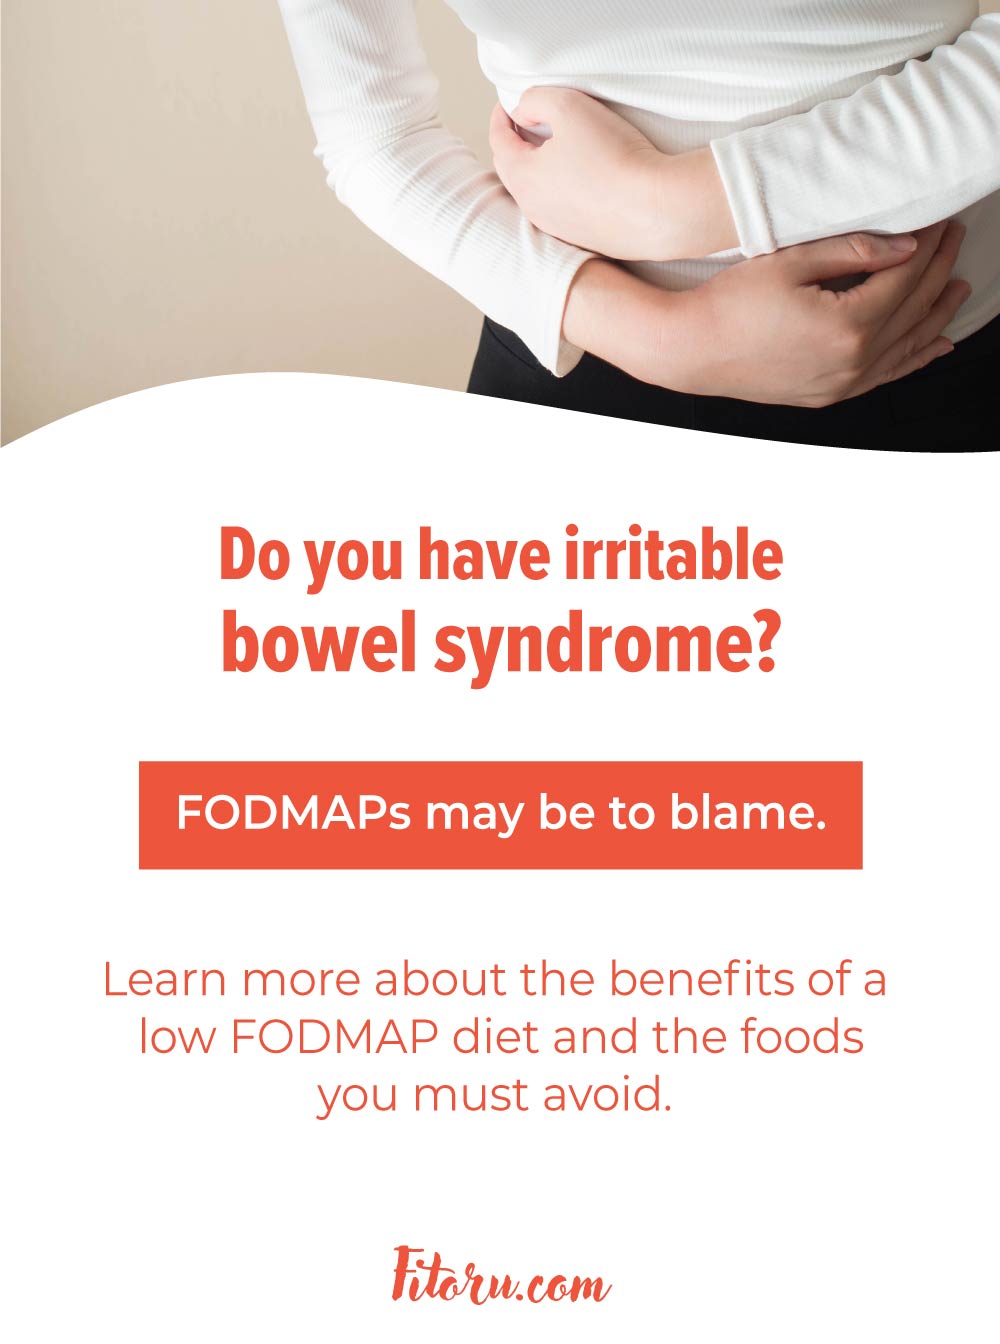 Learn more about the benefits of a low FODMAP diet and the foods you must avoid.